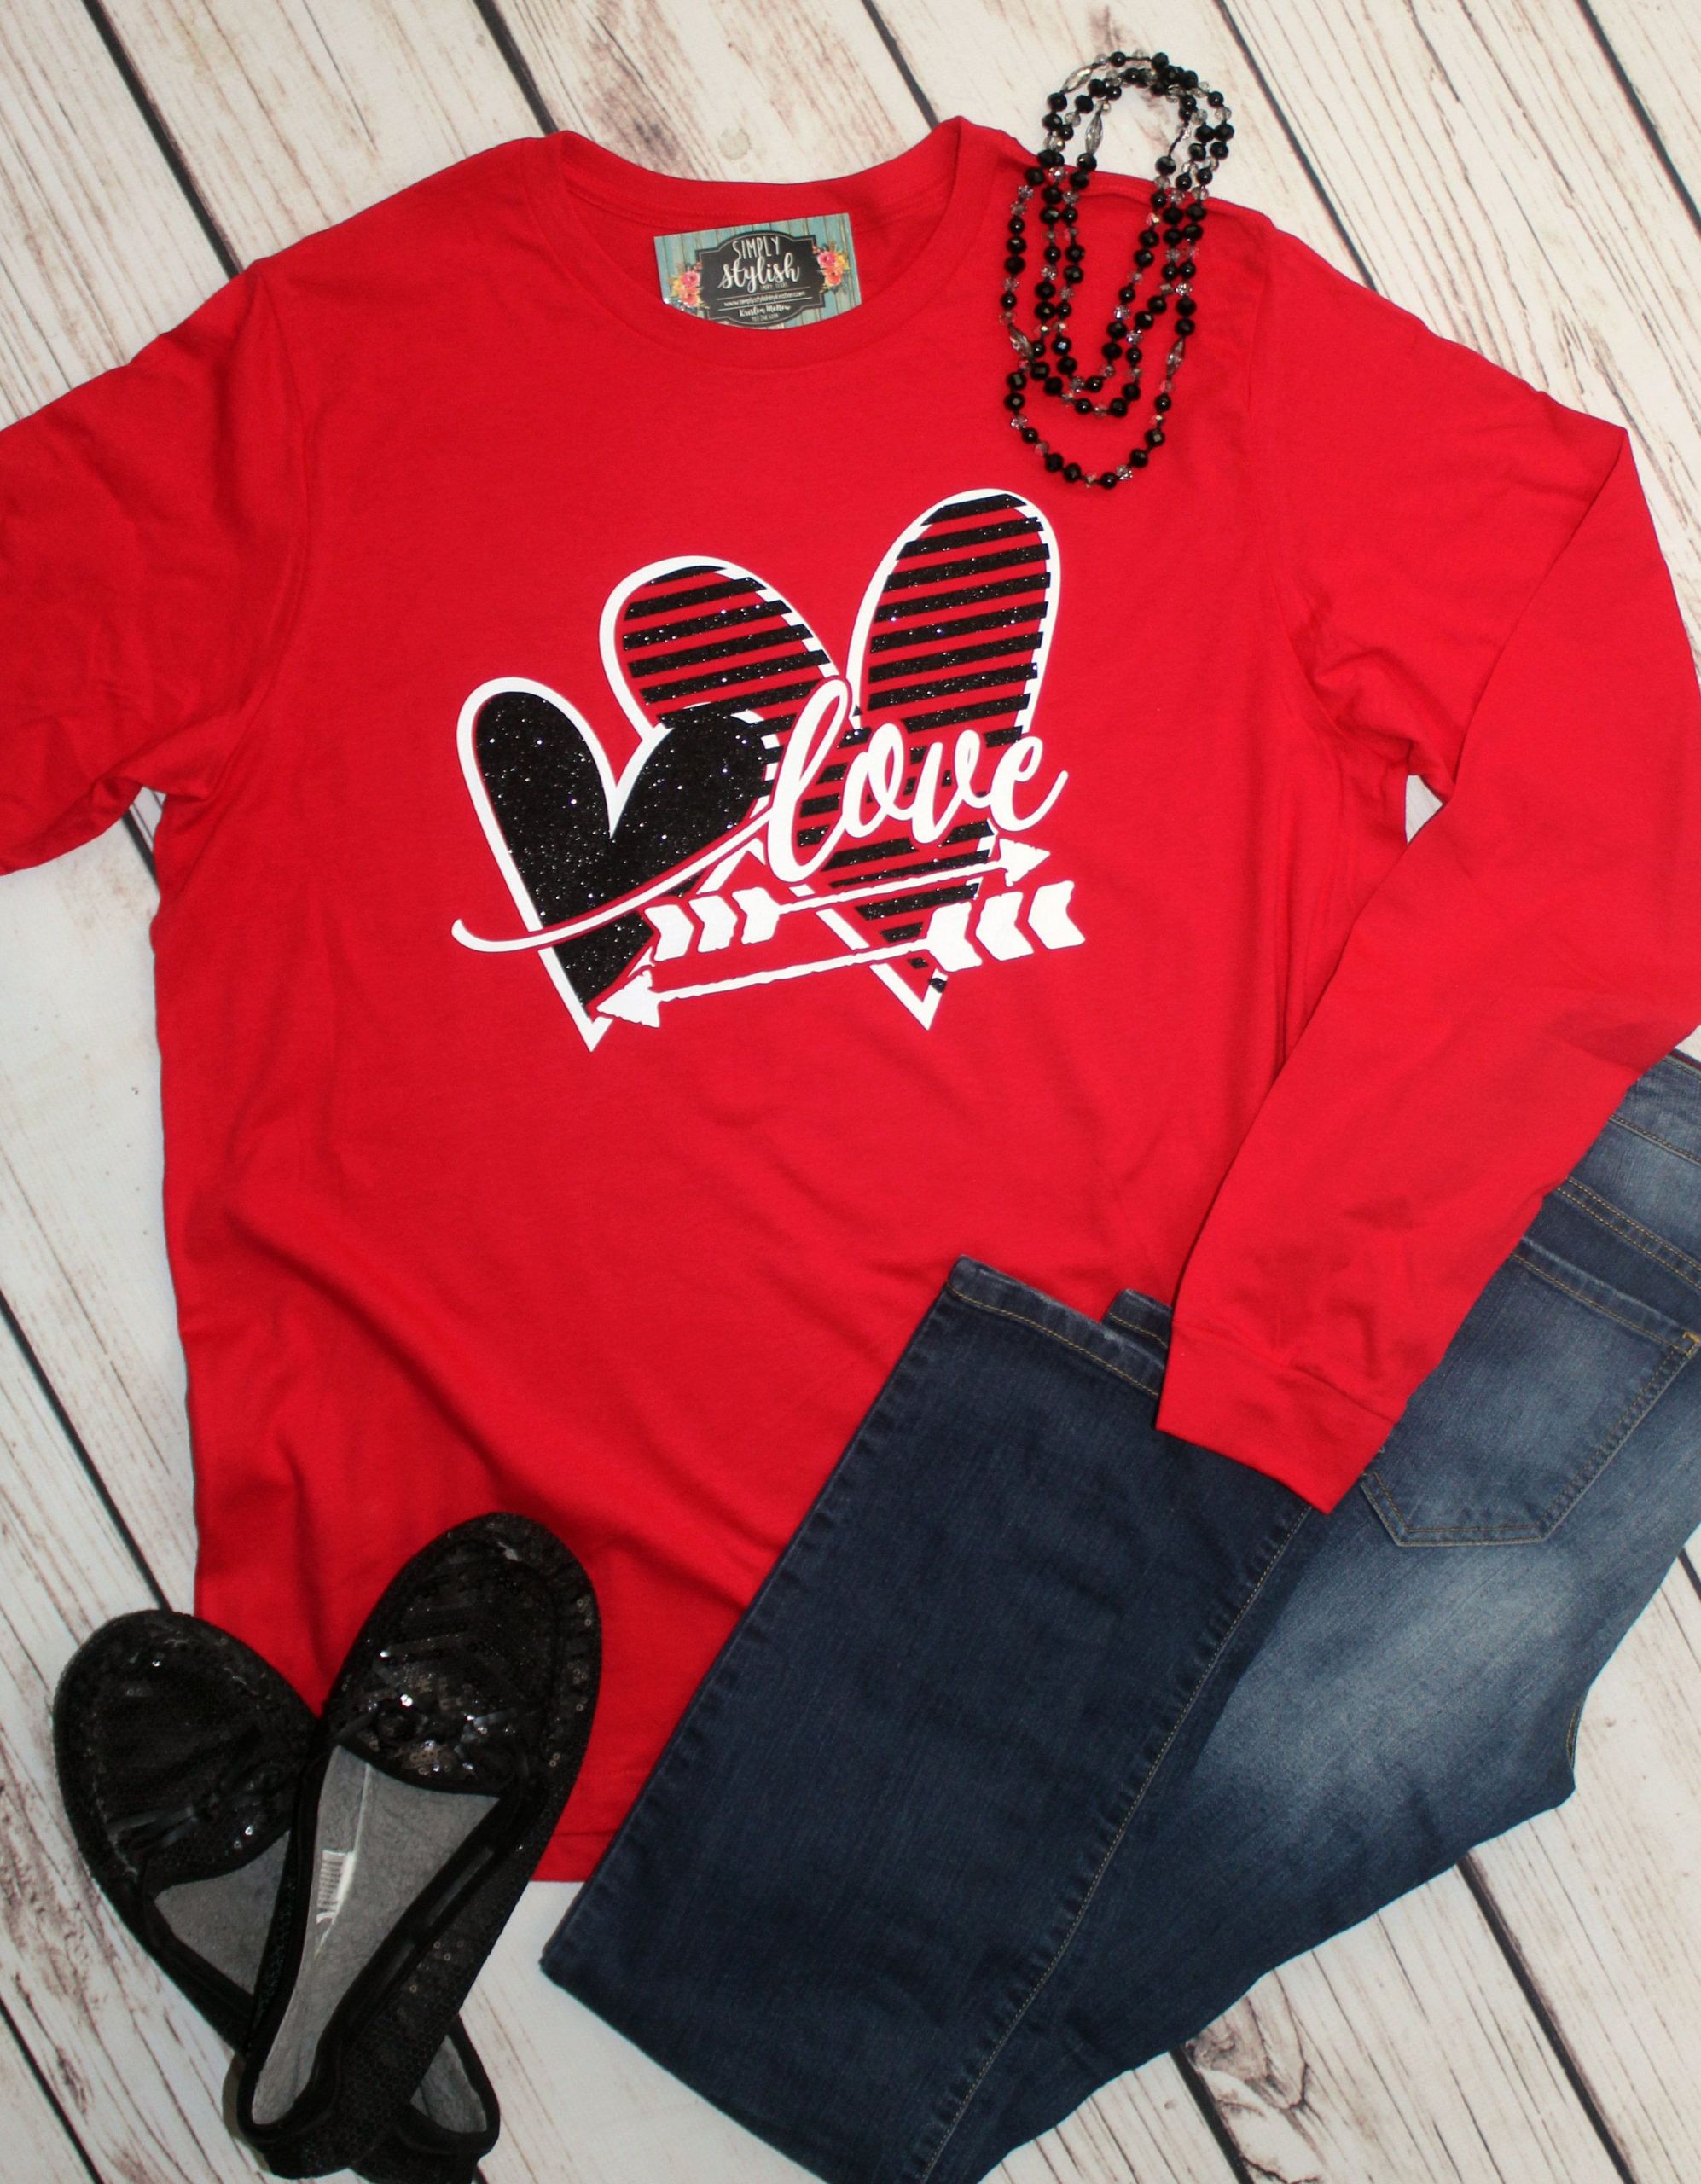 Valentines Day Shirt Ideas
 Pin on SIMPLY STYLISH tees